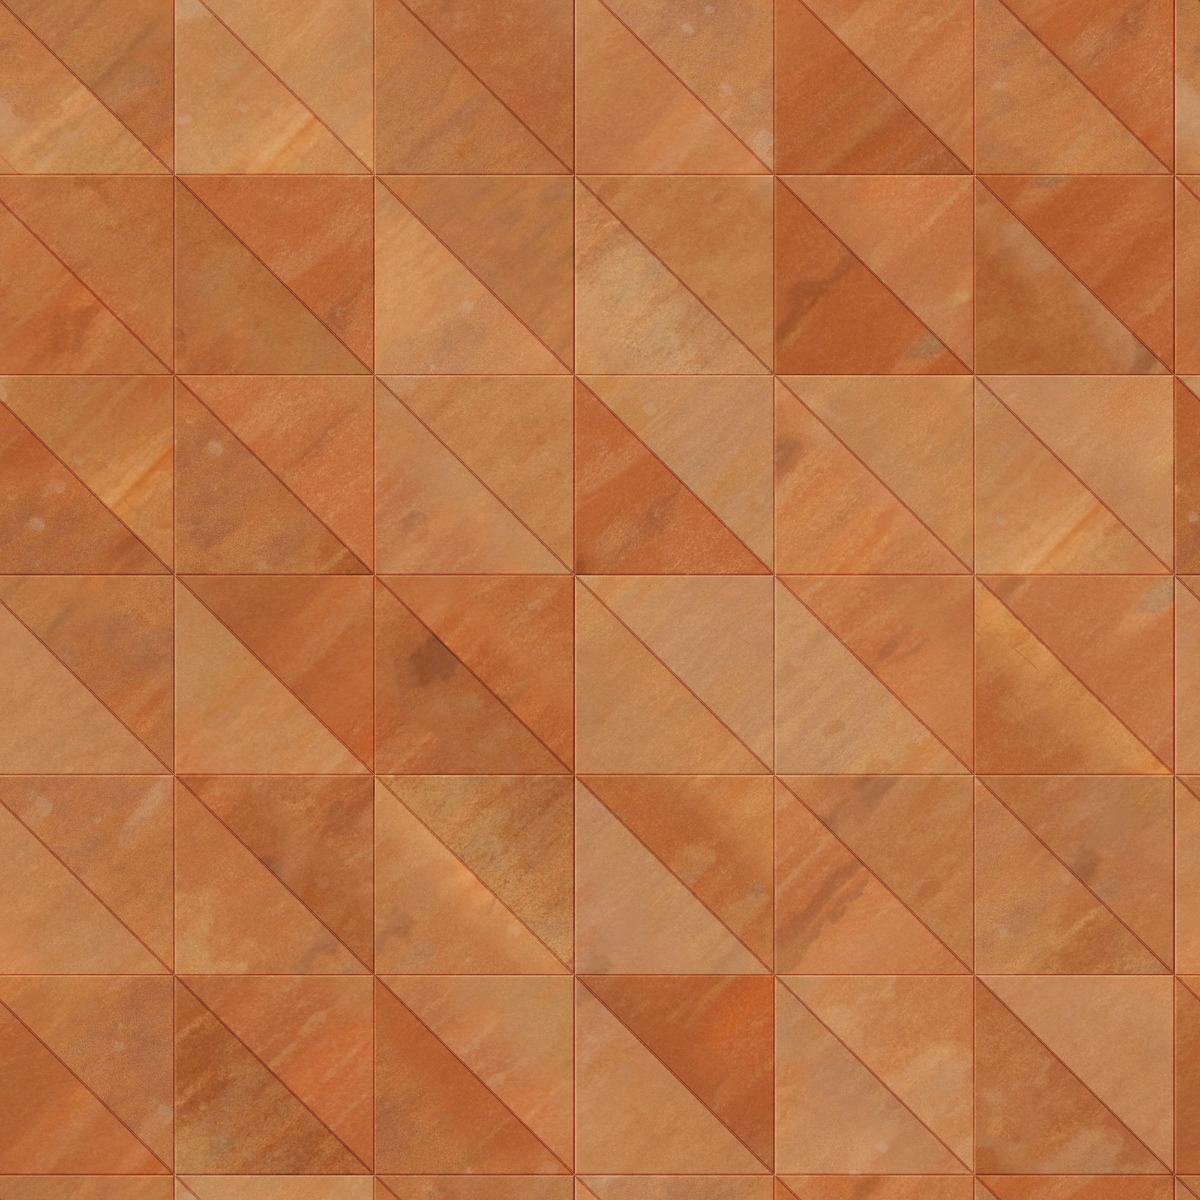 A seamless metal texture with corten steel a sheets arranged in a Triangle pattern